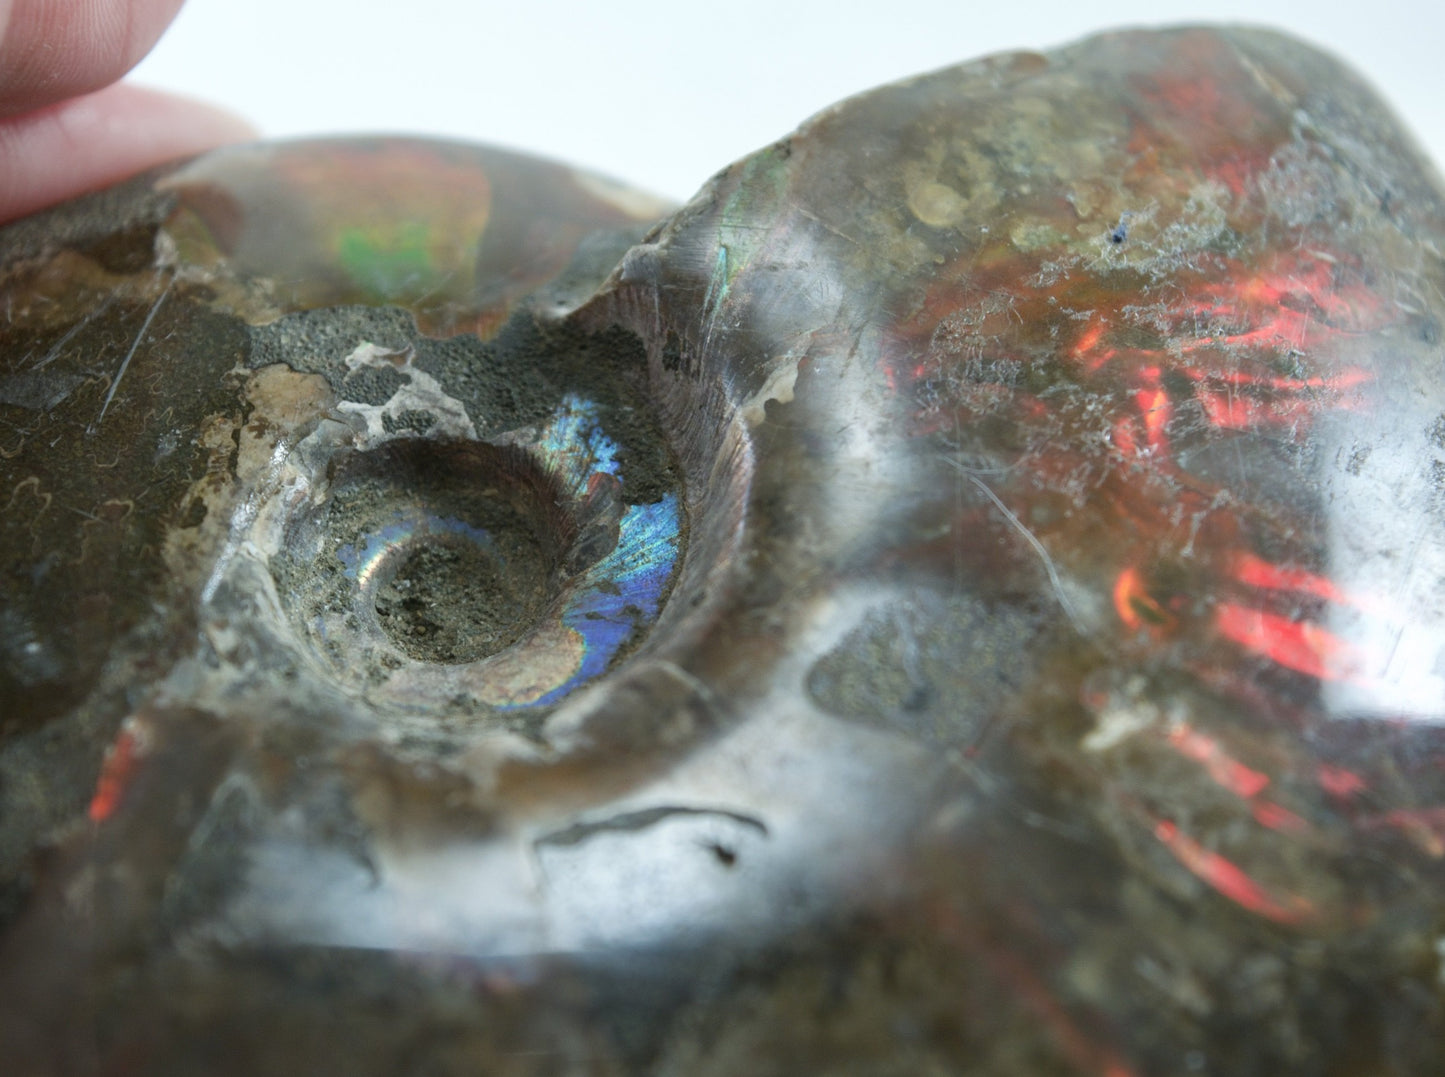 Ammonite (For Stability) - Shell Fossil